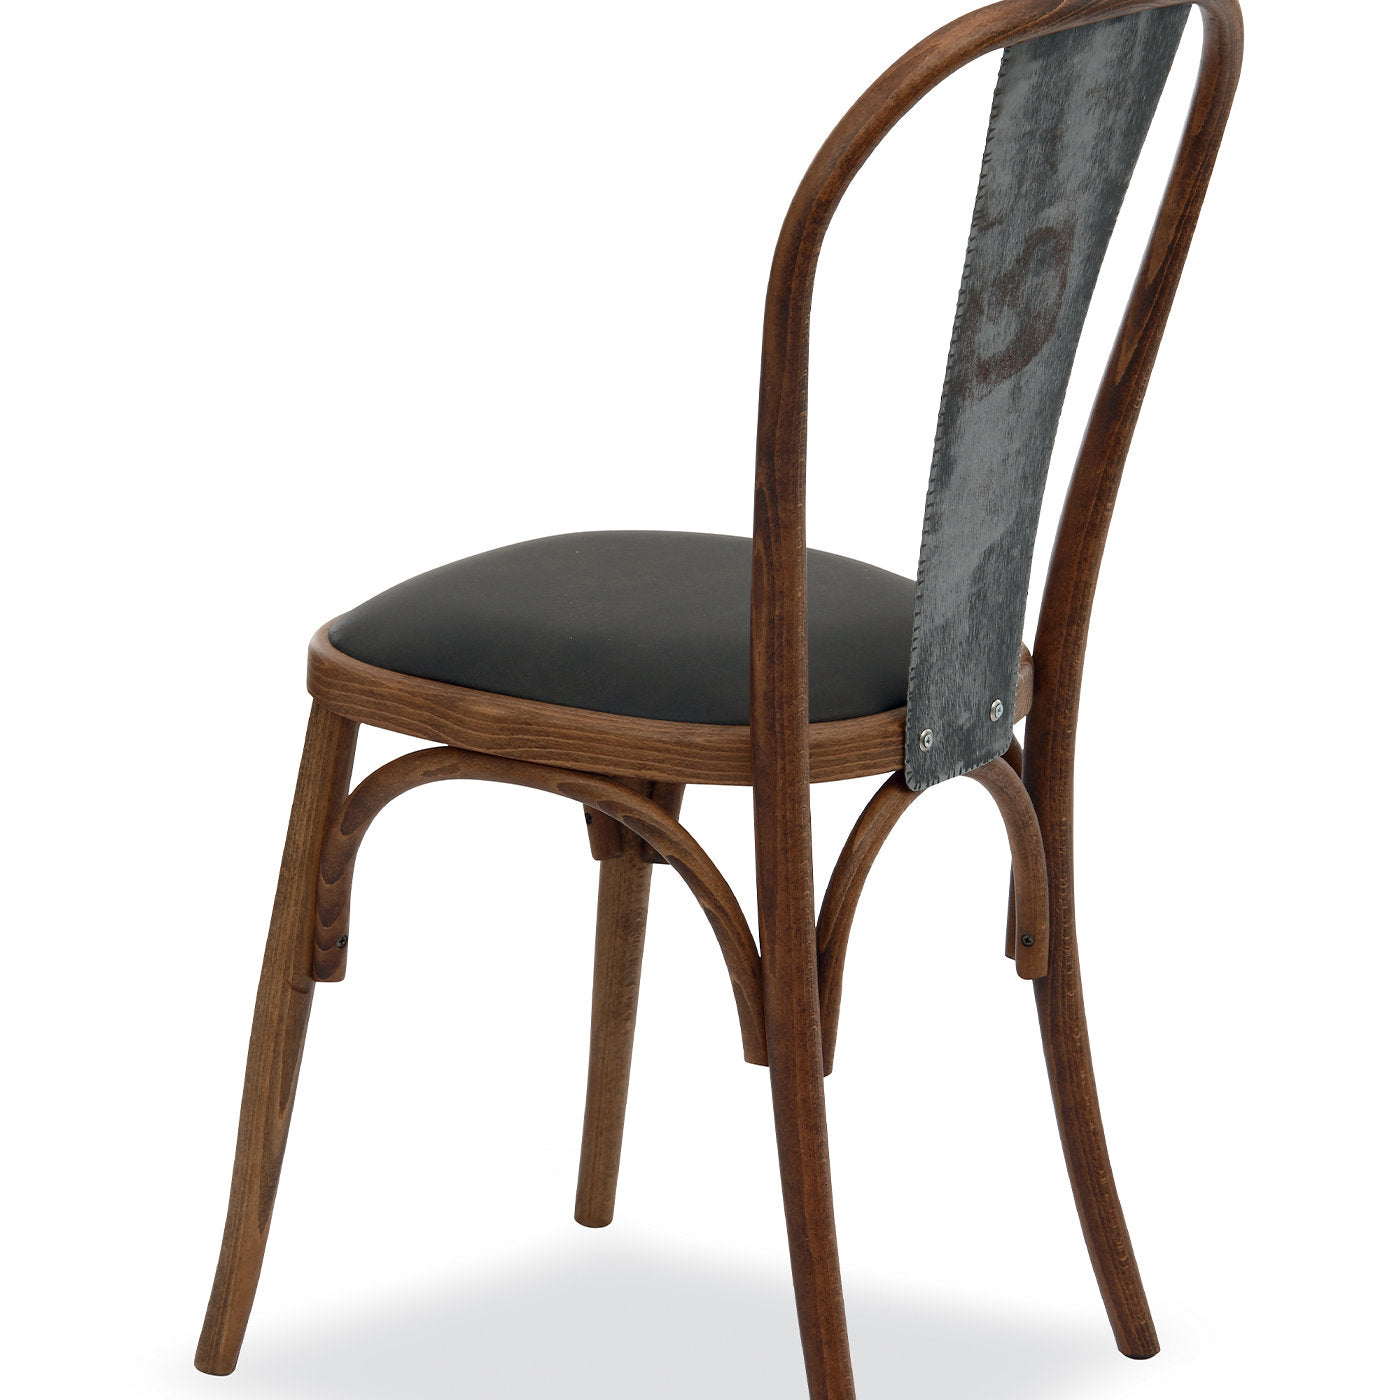 15 Set of 2 Chairs - Alternative view 1